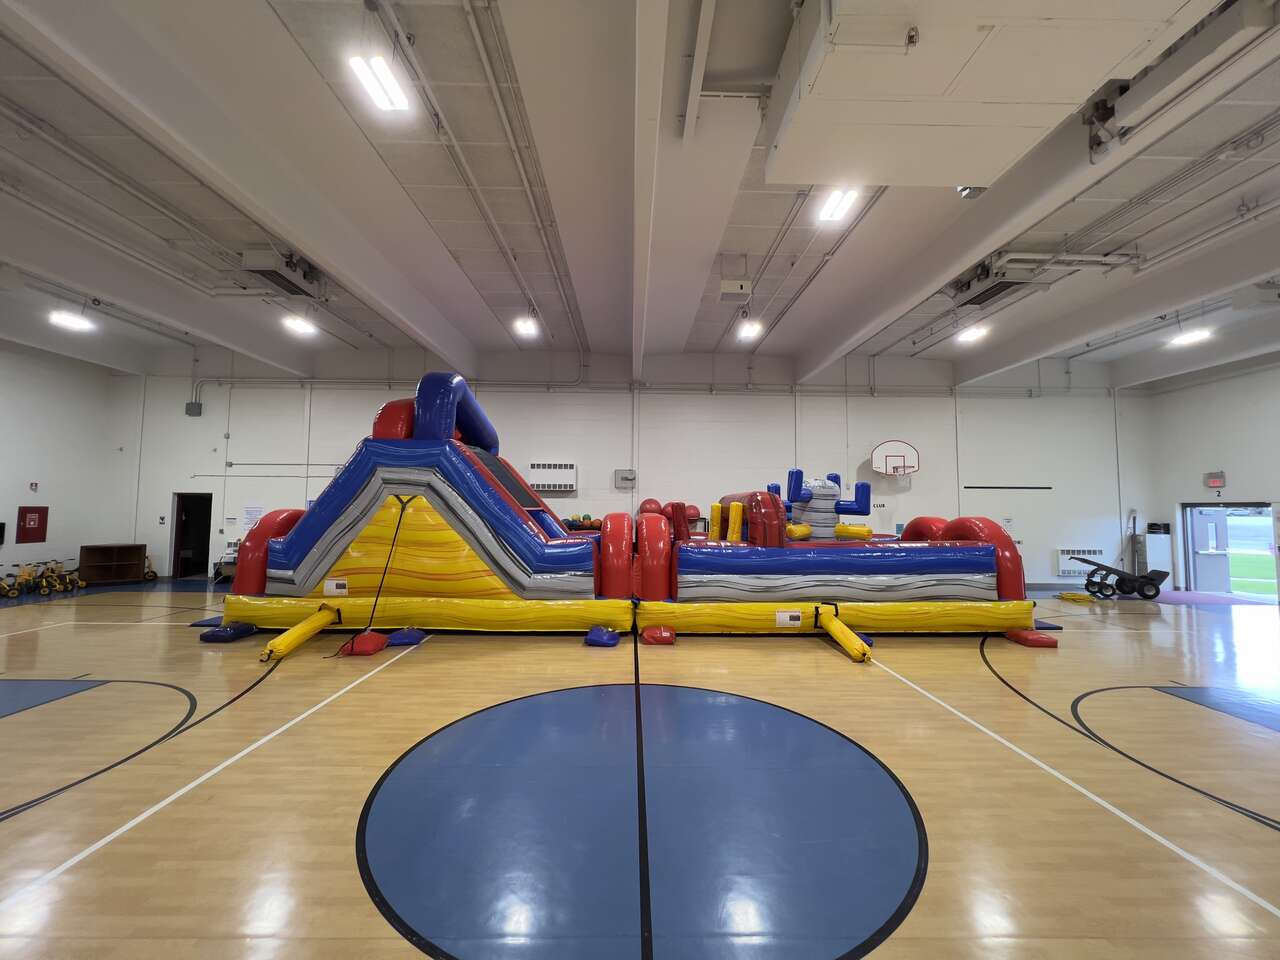 obstacles courses rental, from Fun Bounces Rental in Plano, IL 60545